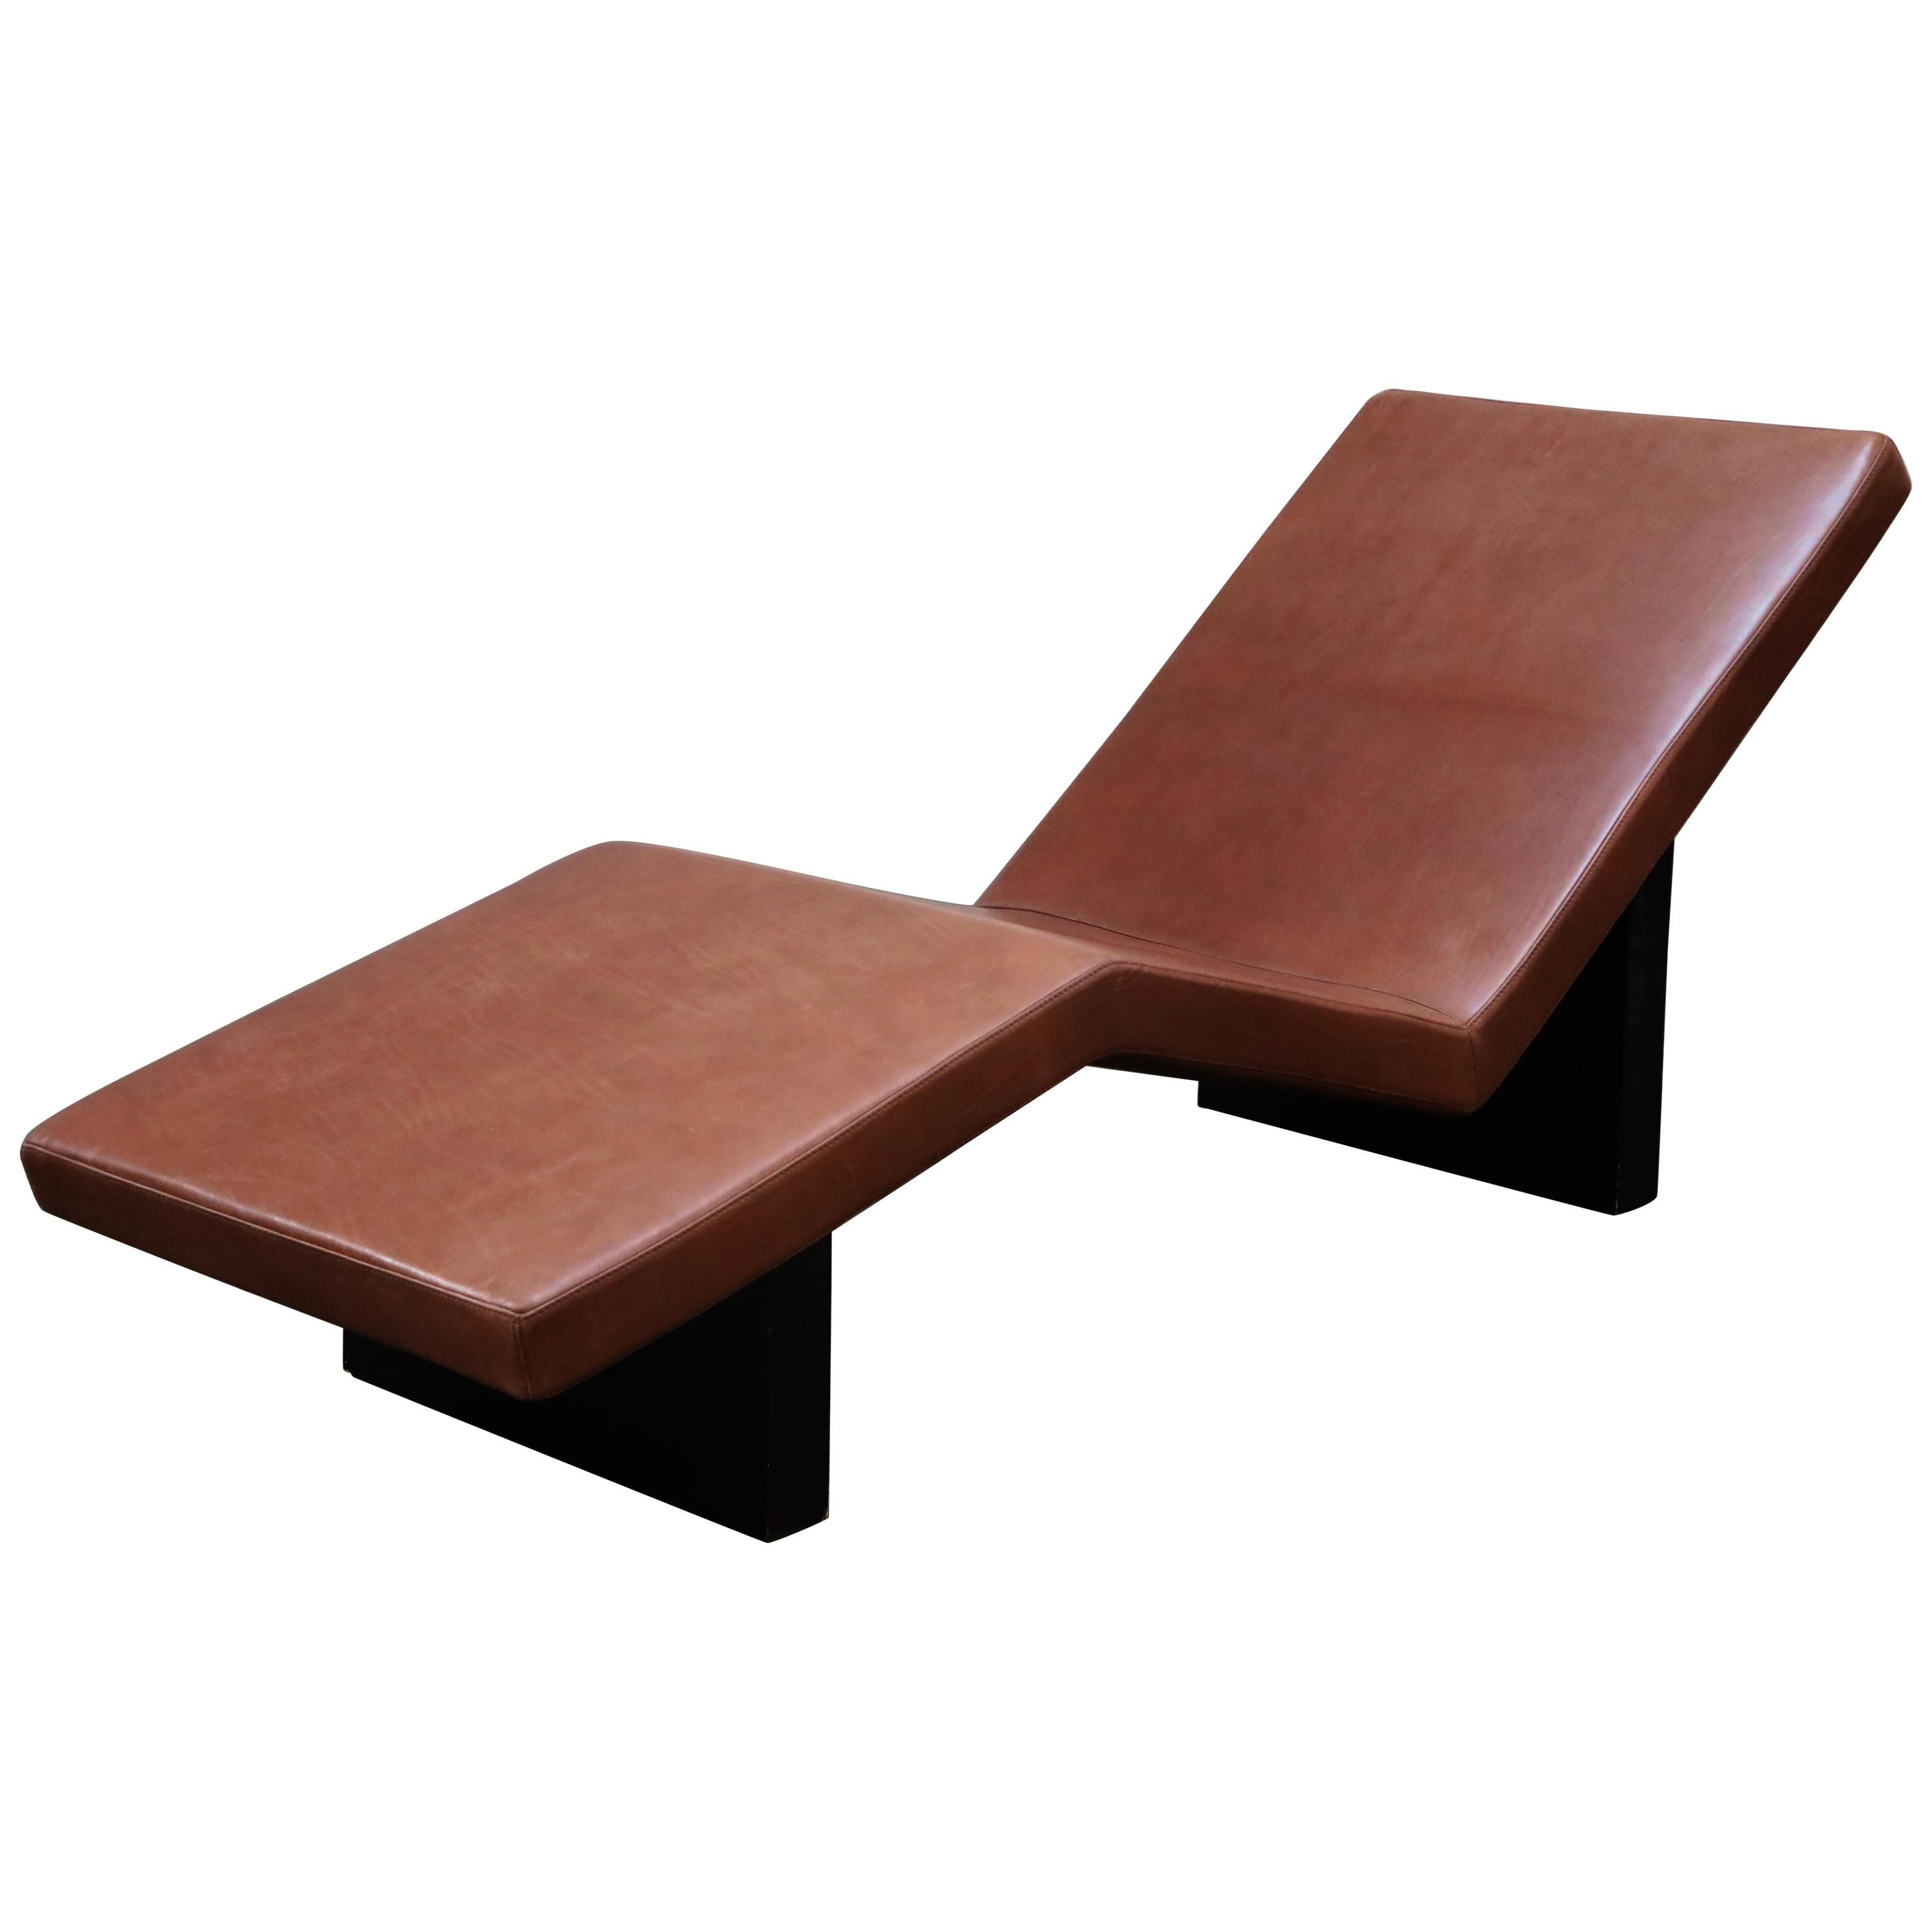 Armani Casa Architectural "Stock Market" Chaise Lounge in Medium Brown Leather 